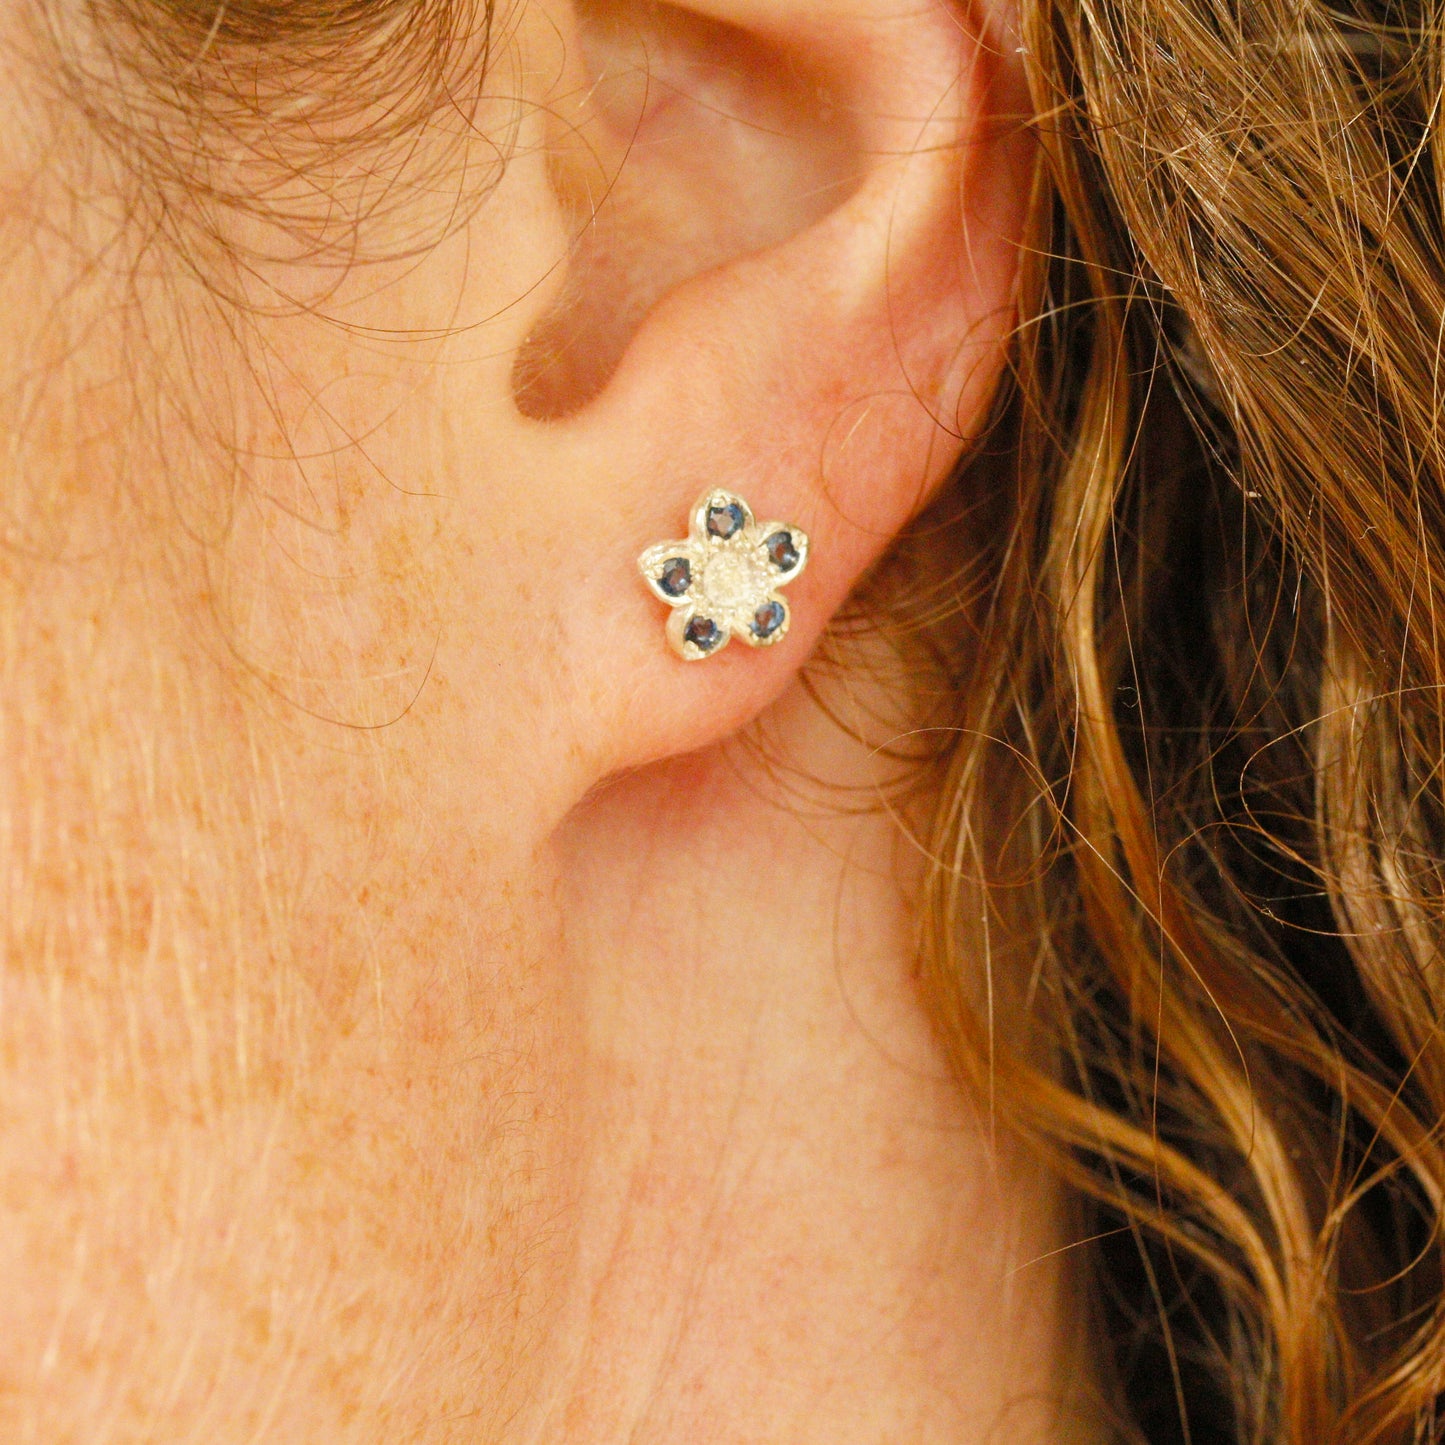 Sapphire wahlenbergia studs